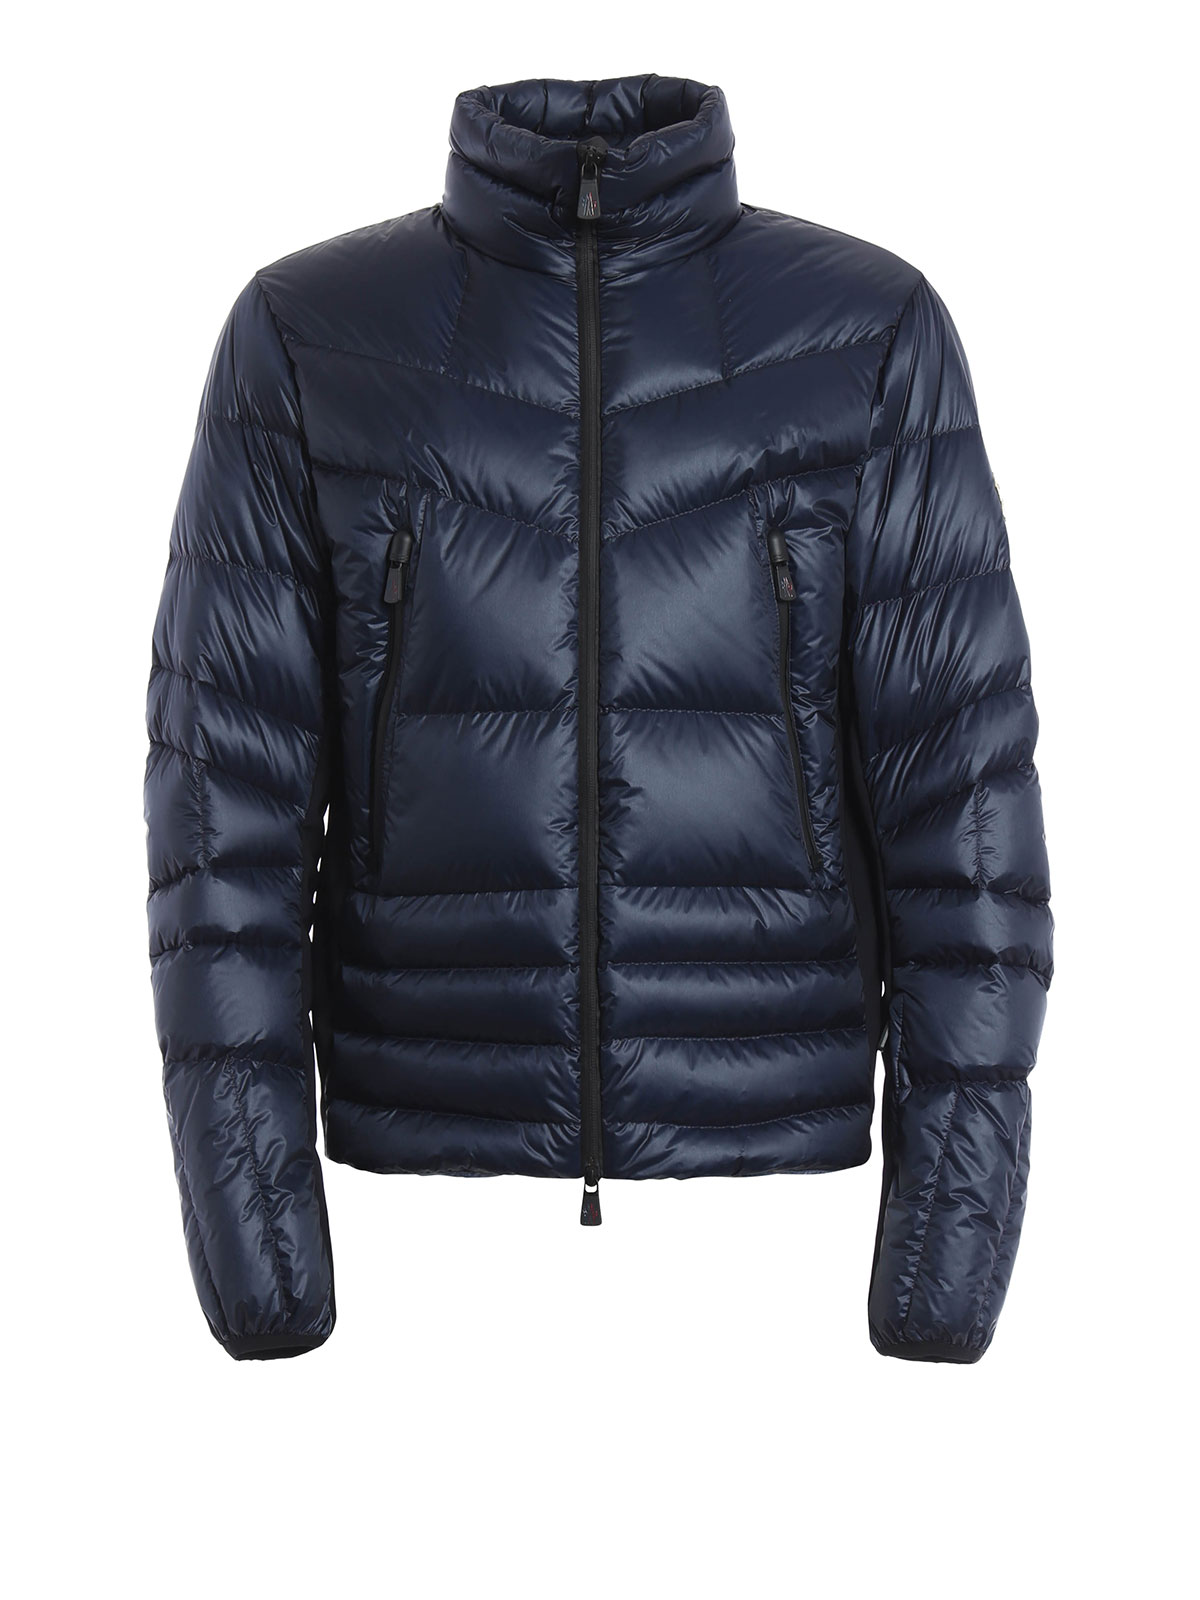 Padded jackets Moncler Grenoble - Canmore down jacket 